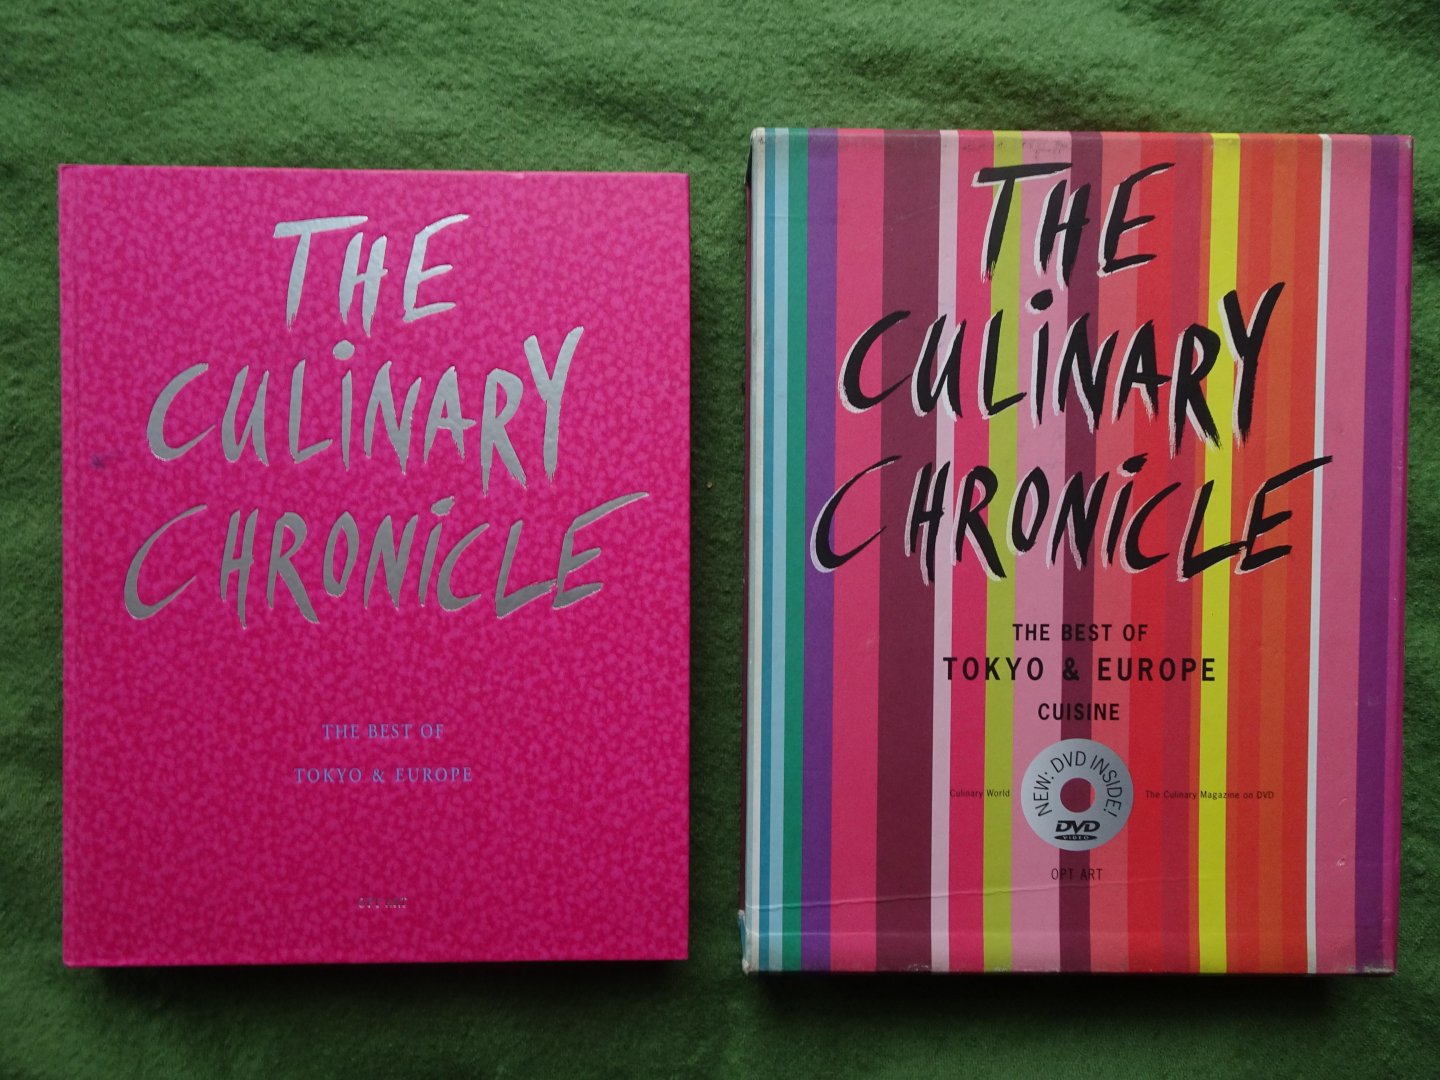  - THE CULINARY CHRONICLE Vol. 8: THE BEST OF TOKYO & EUROPE